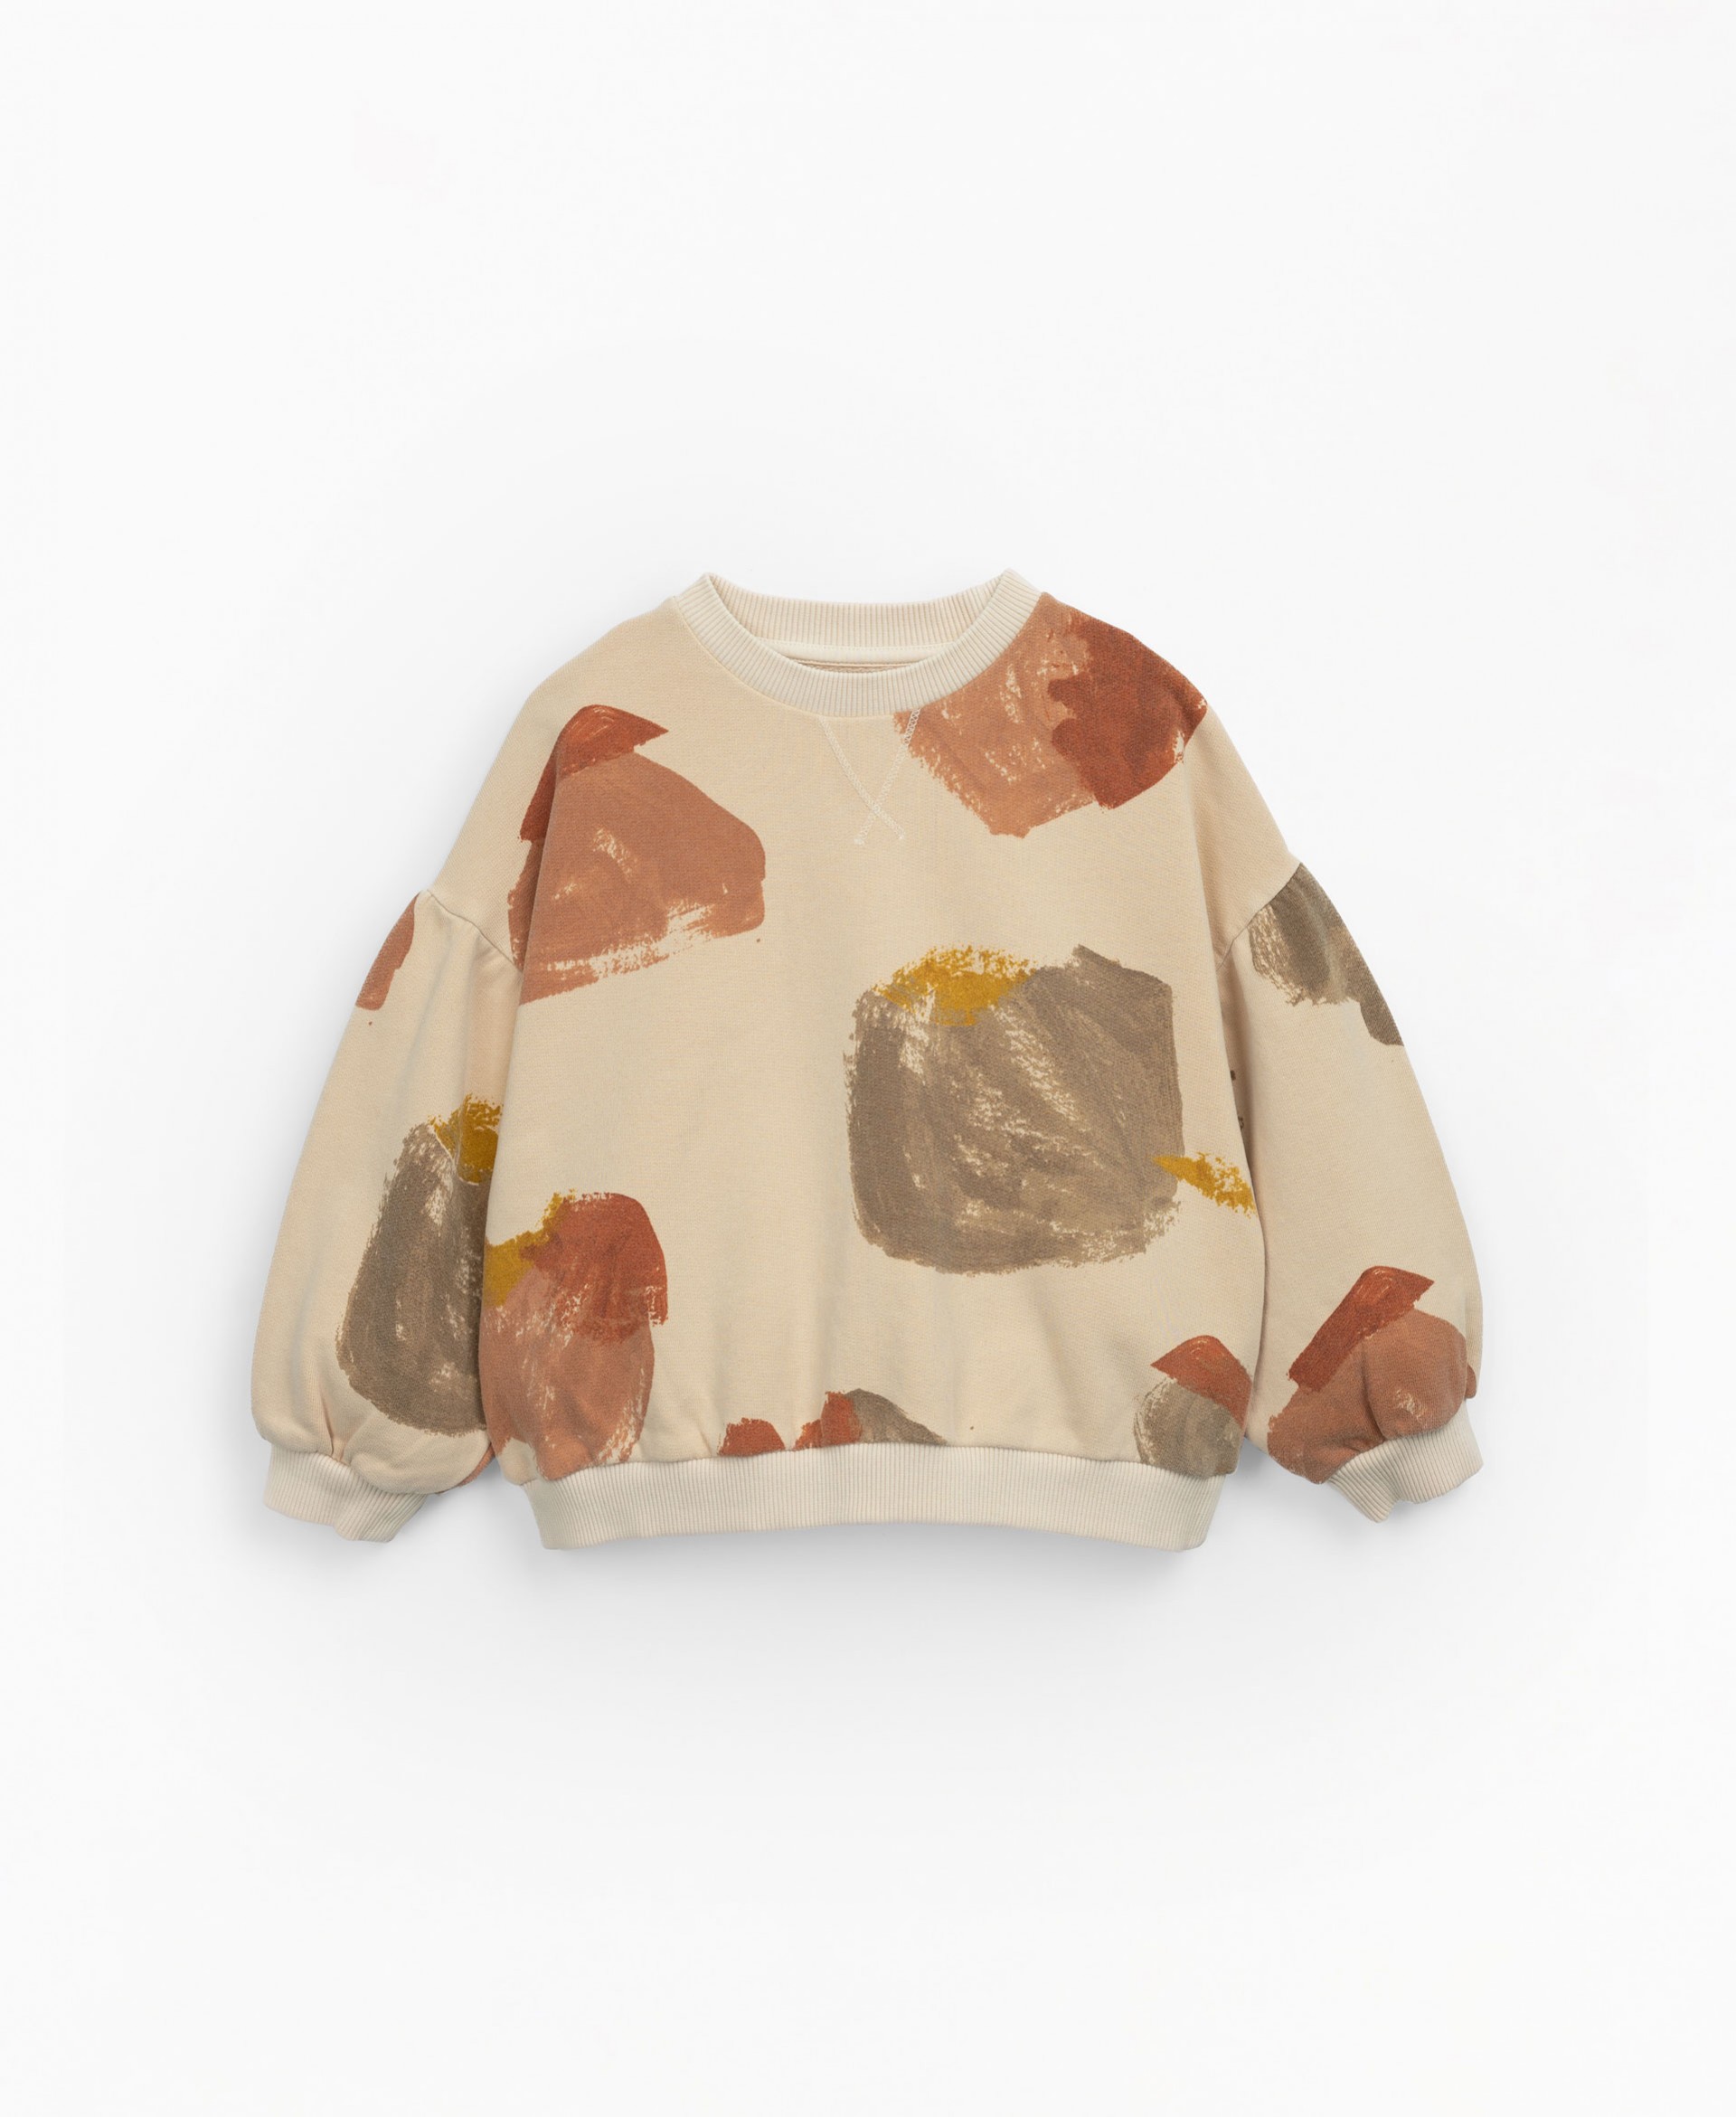 Naturally dyed printed jersey | Mother Lúcia